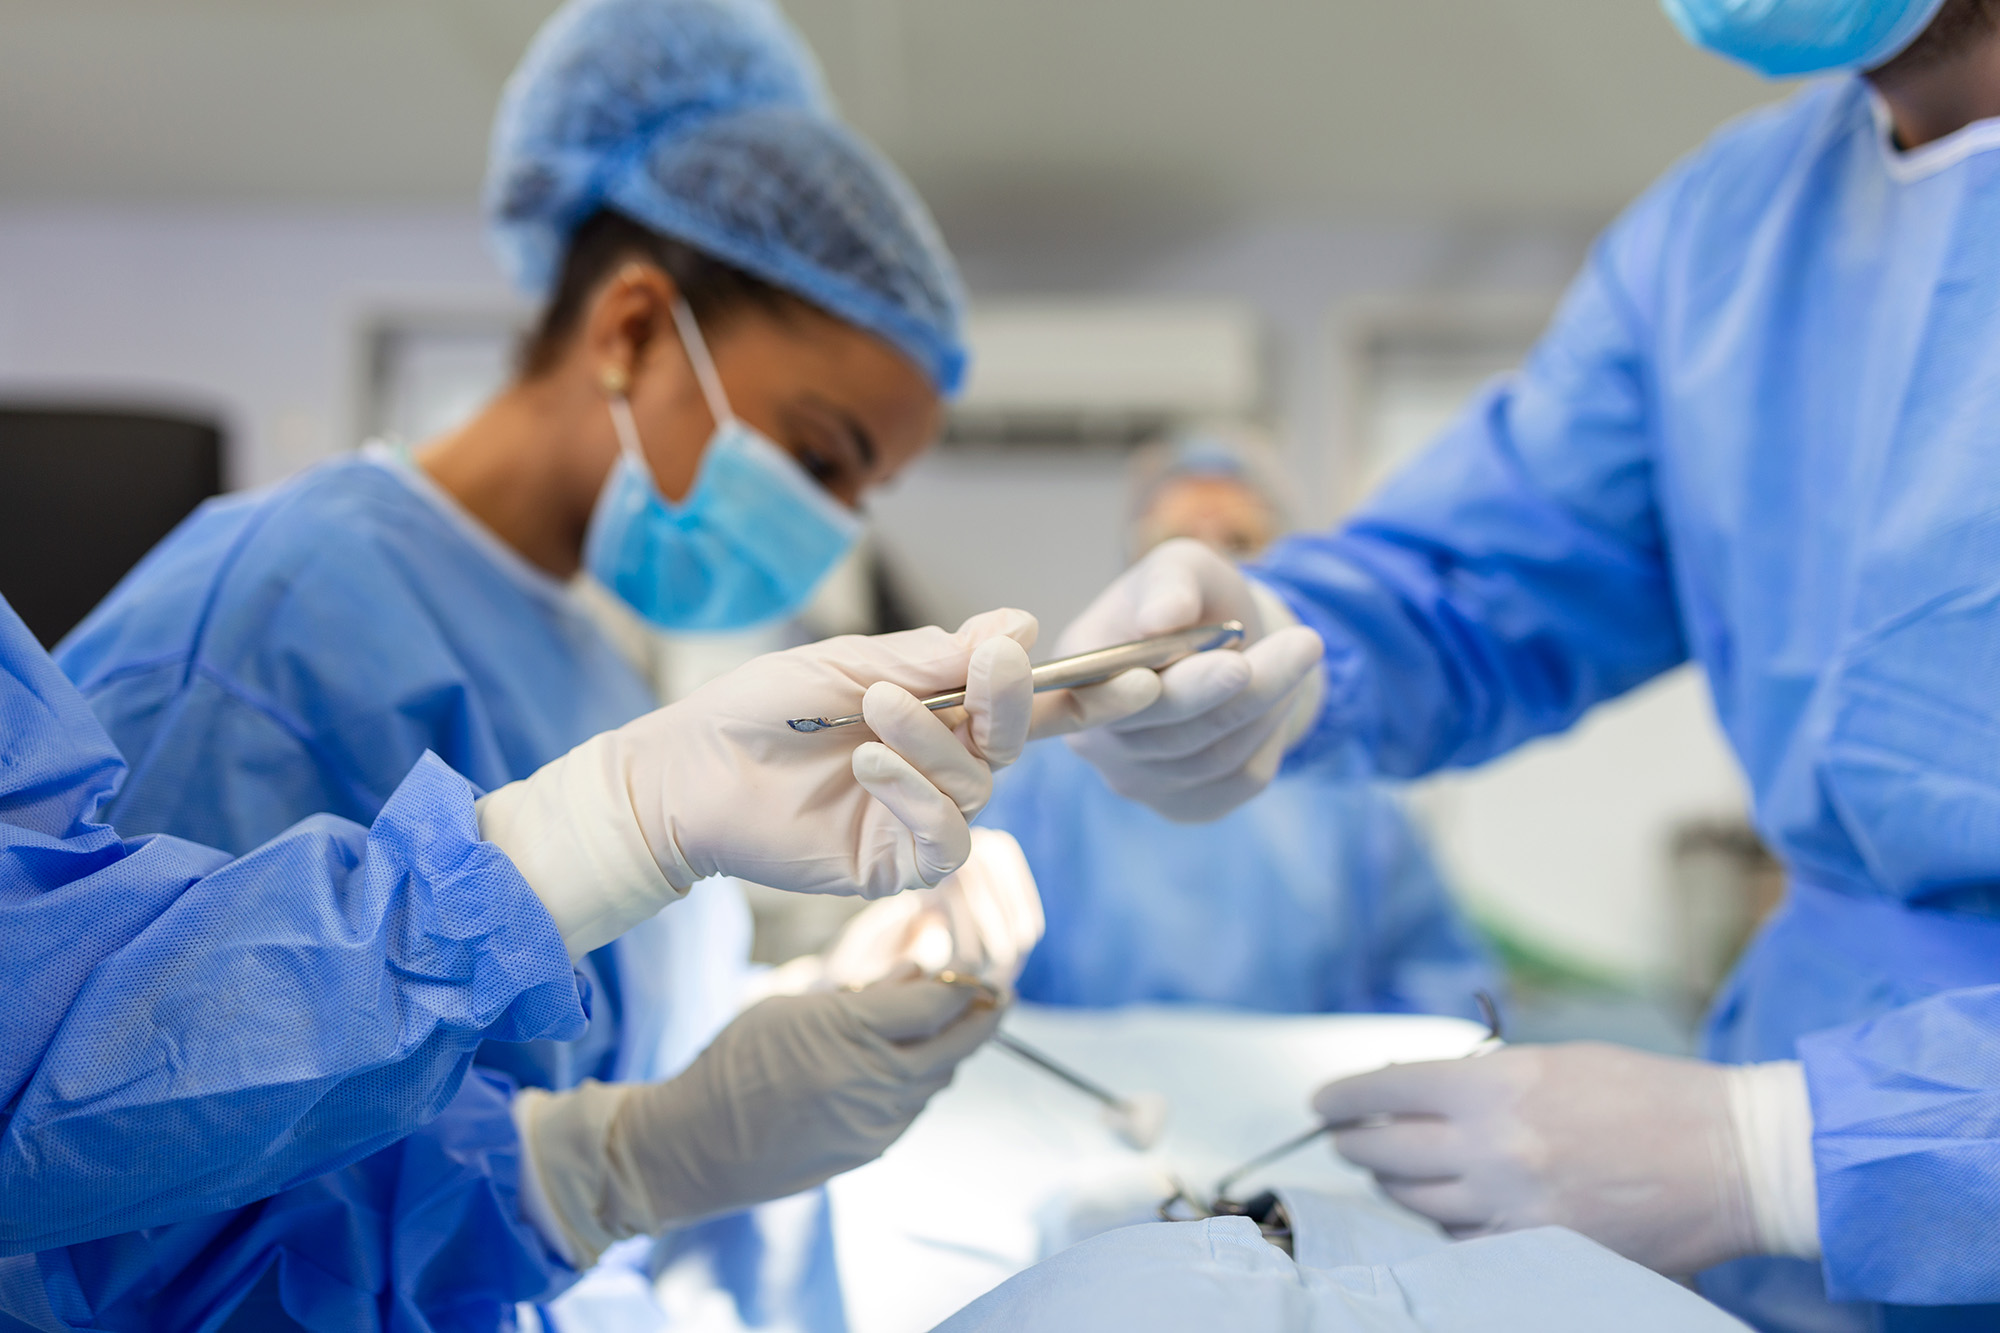 7 Common Types of Orthopedic Surgery